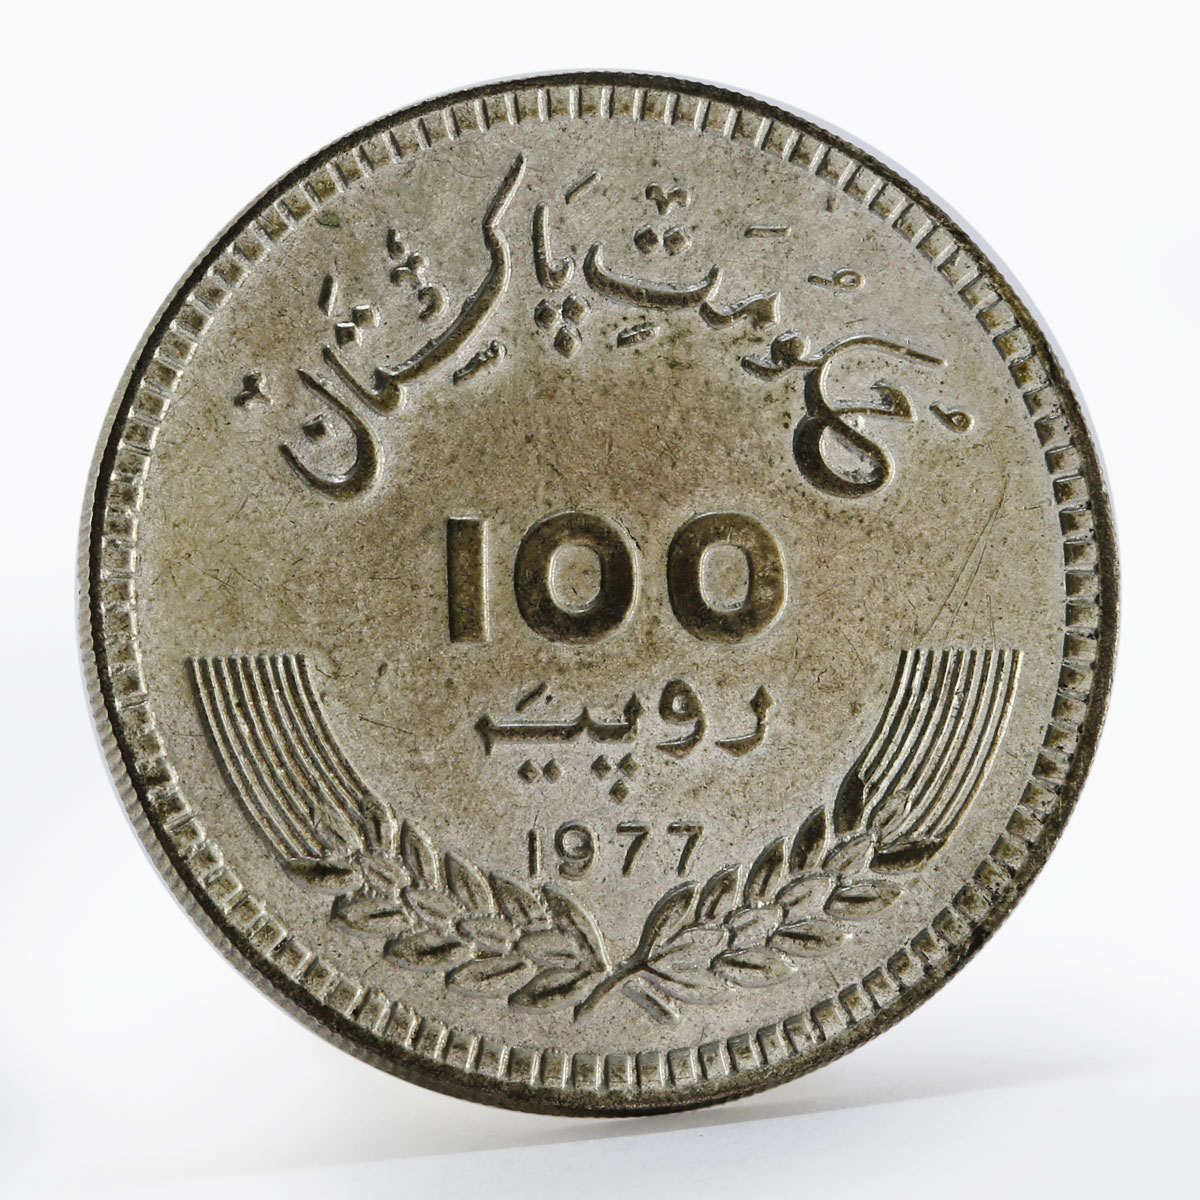 Pakistan 100 rupees Birth of Allama mohammad silver coin 1977